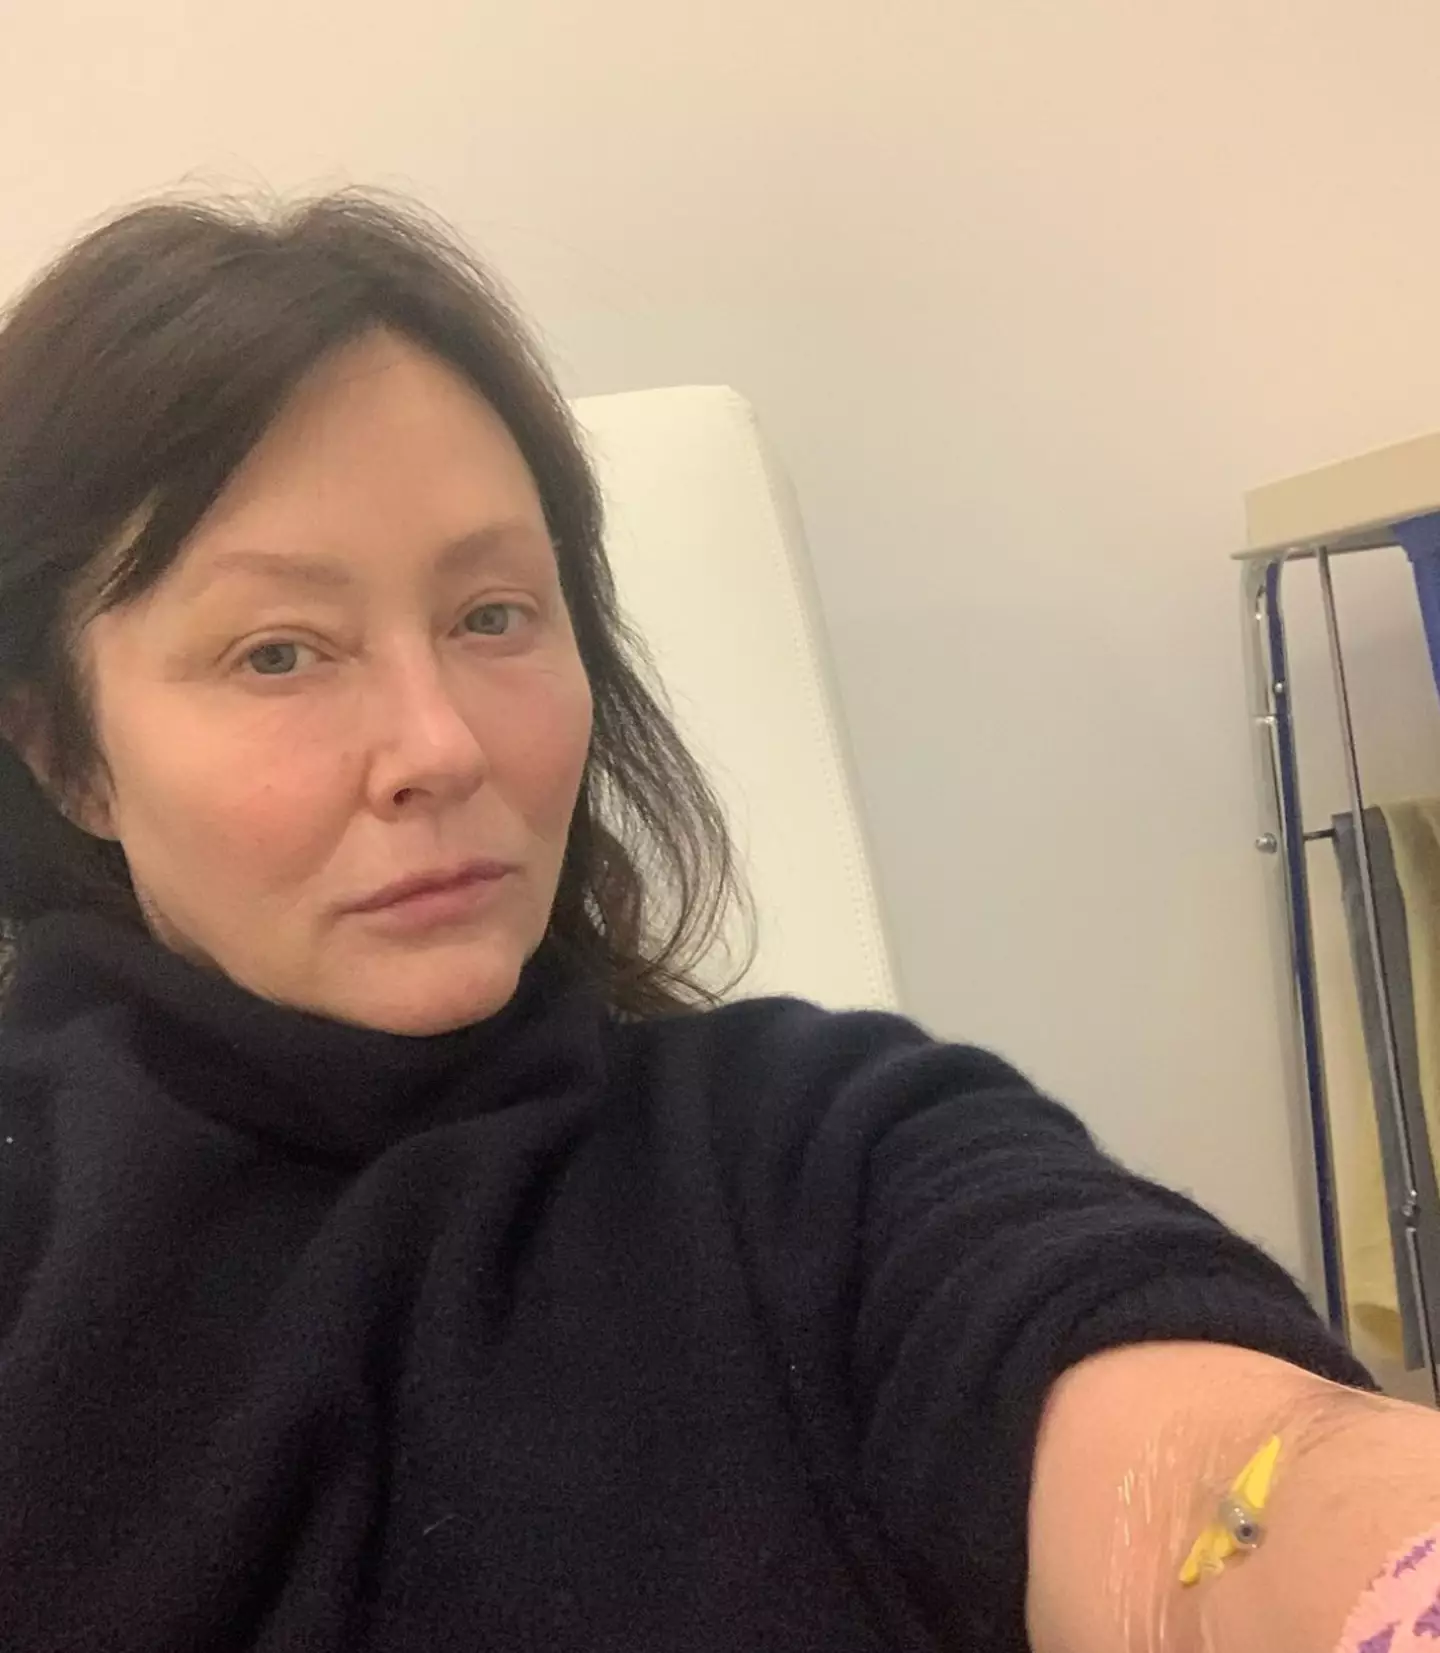 Shannen Doherty was first diagnosed with breast cancer in 2015.